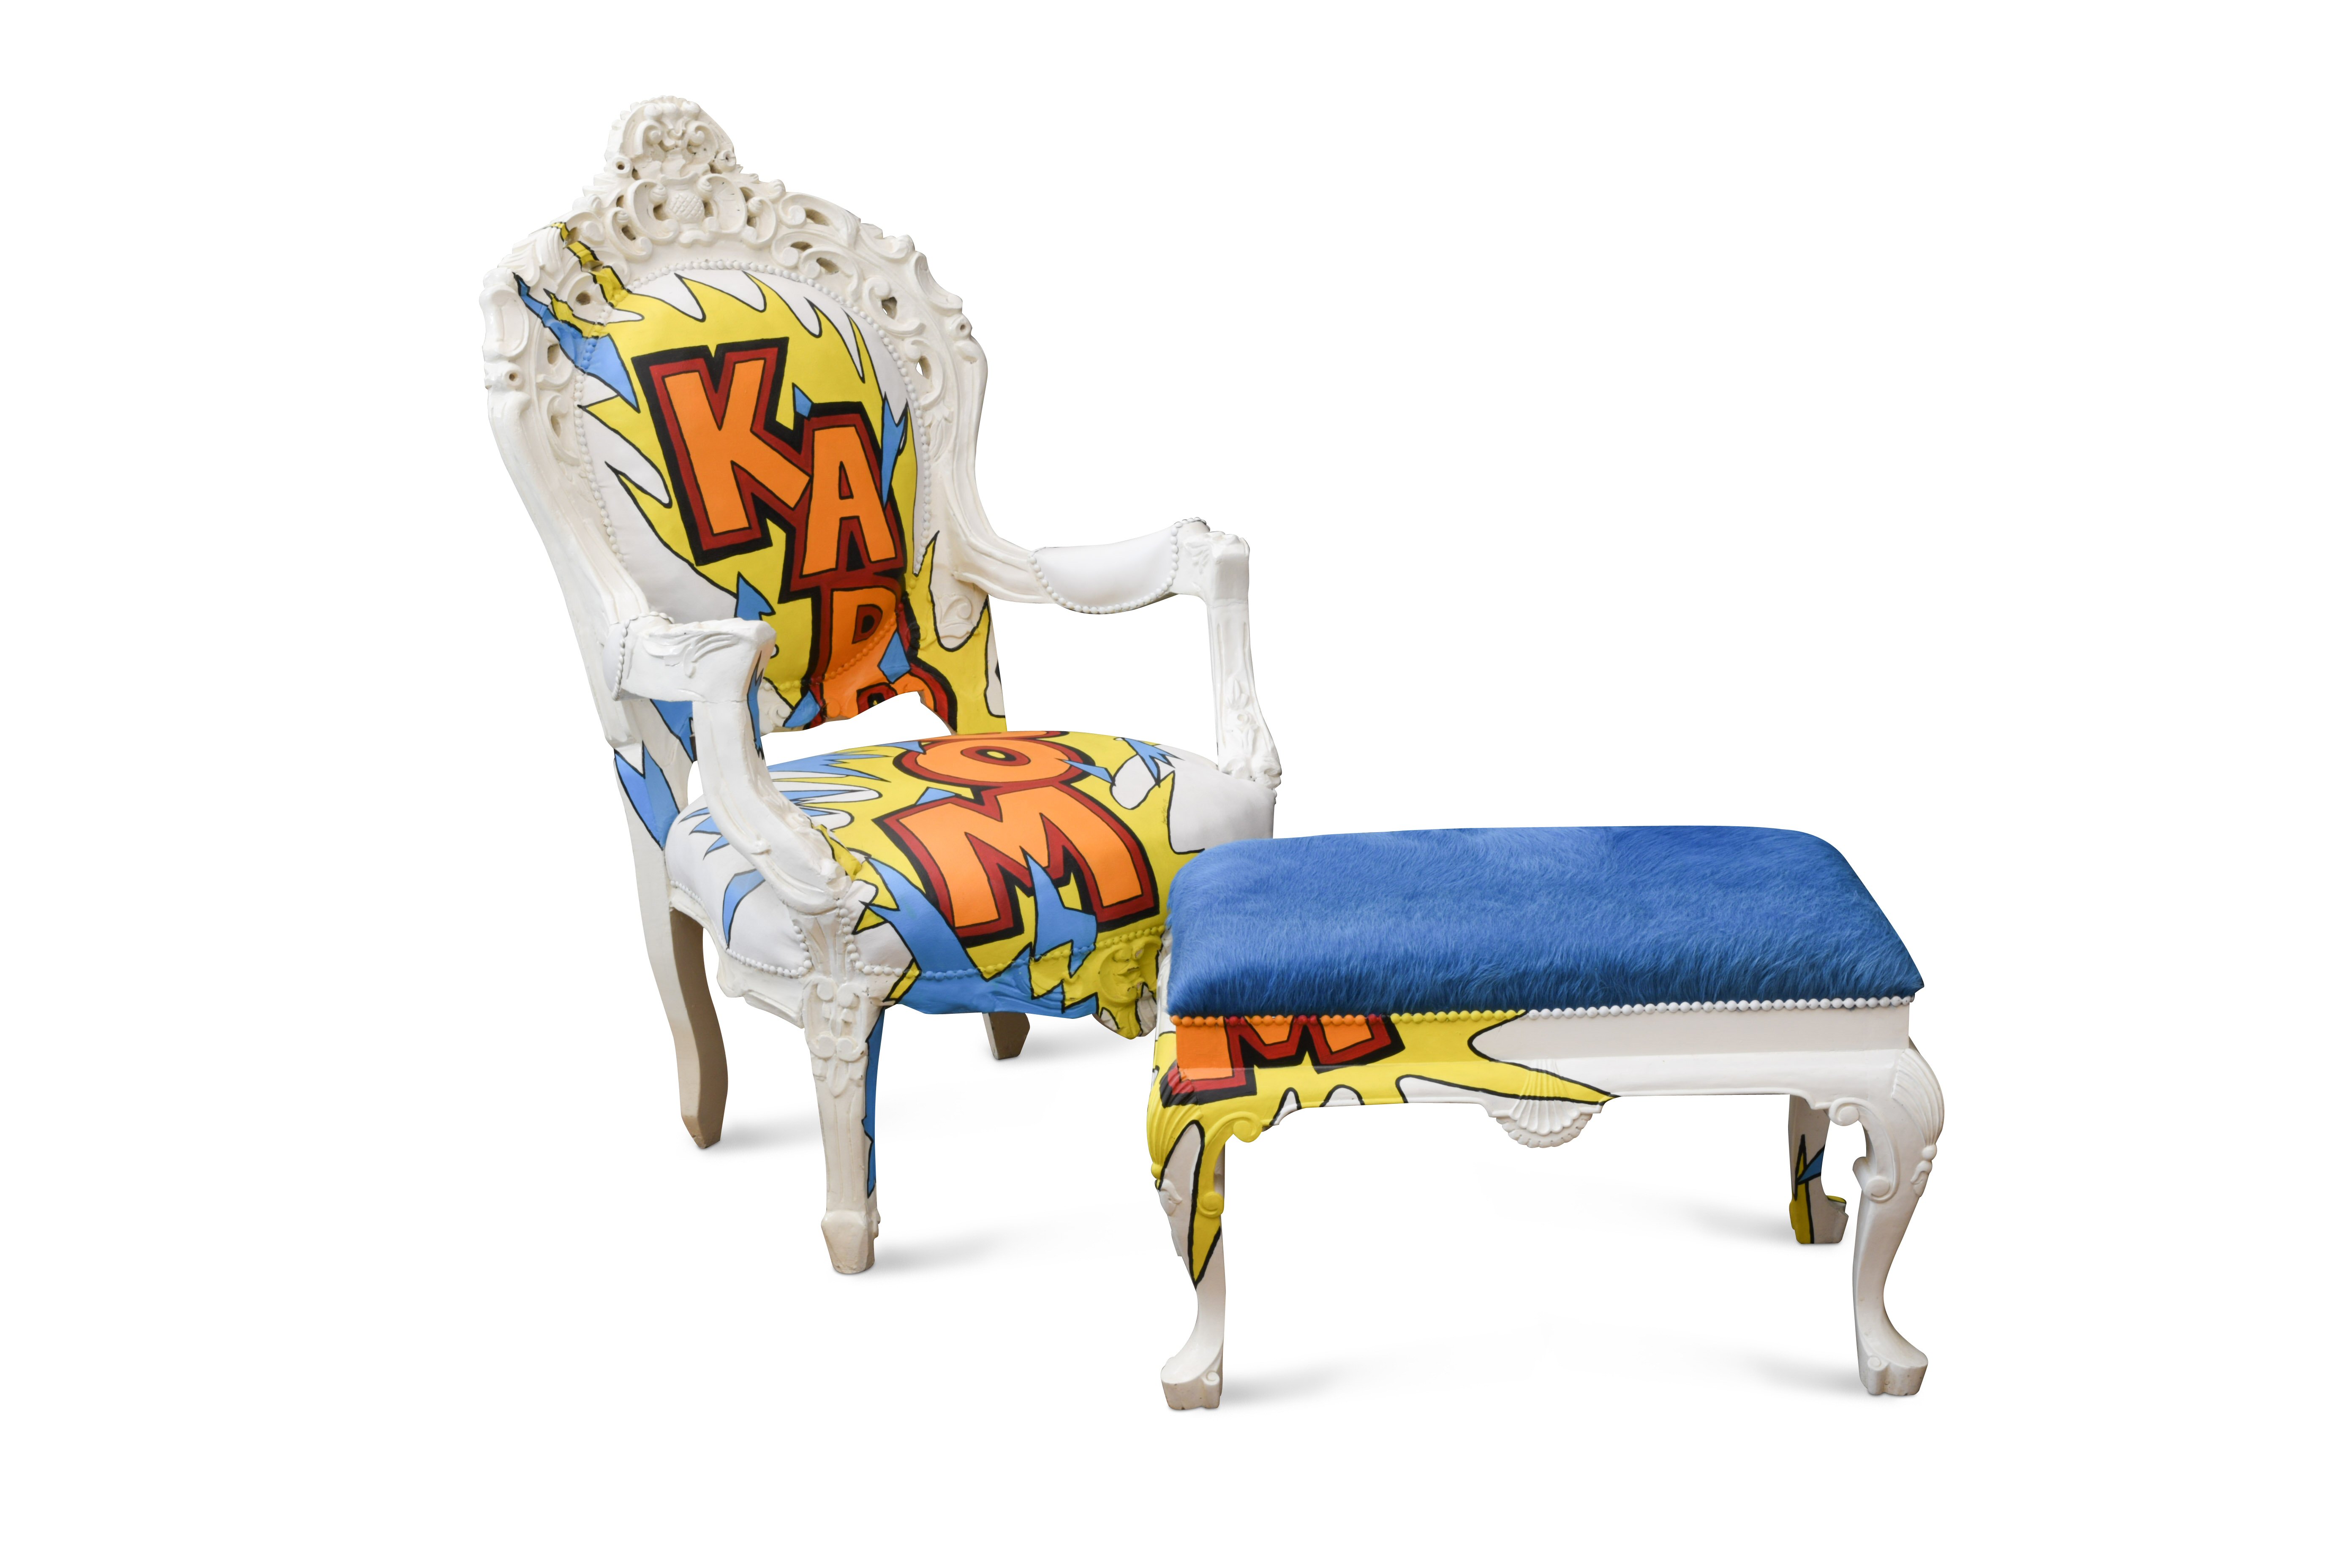 A Jimmie Martin 'kaboom' armchair and foot stool are among Keith Flint's belongings that are being sold at auction. (Cheffins/ PA)